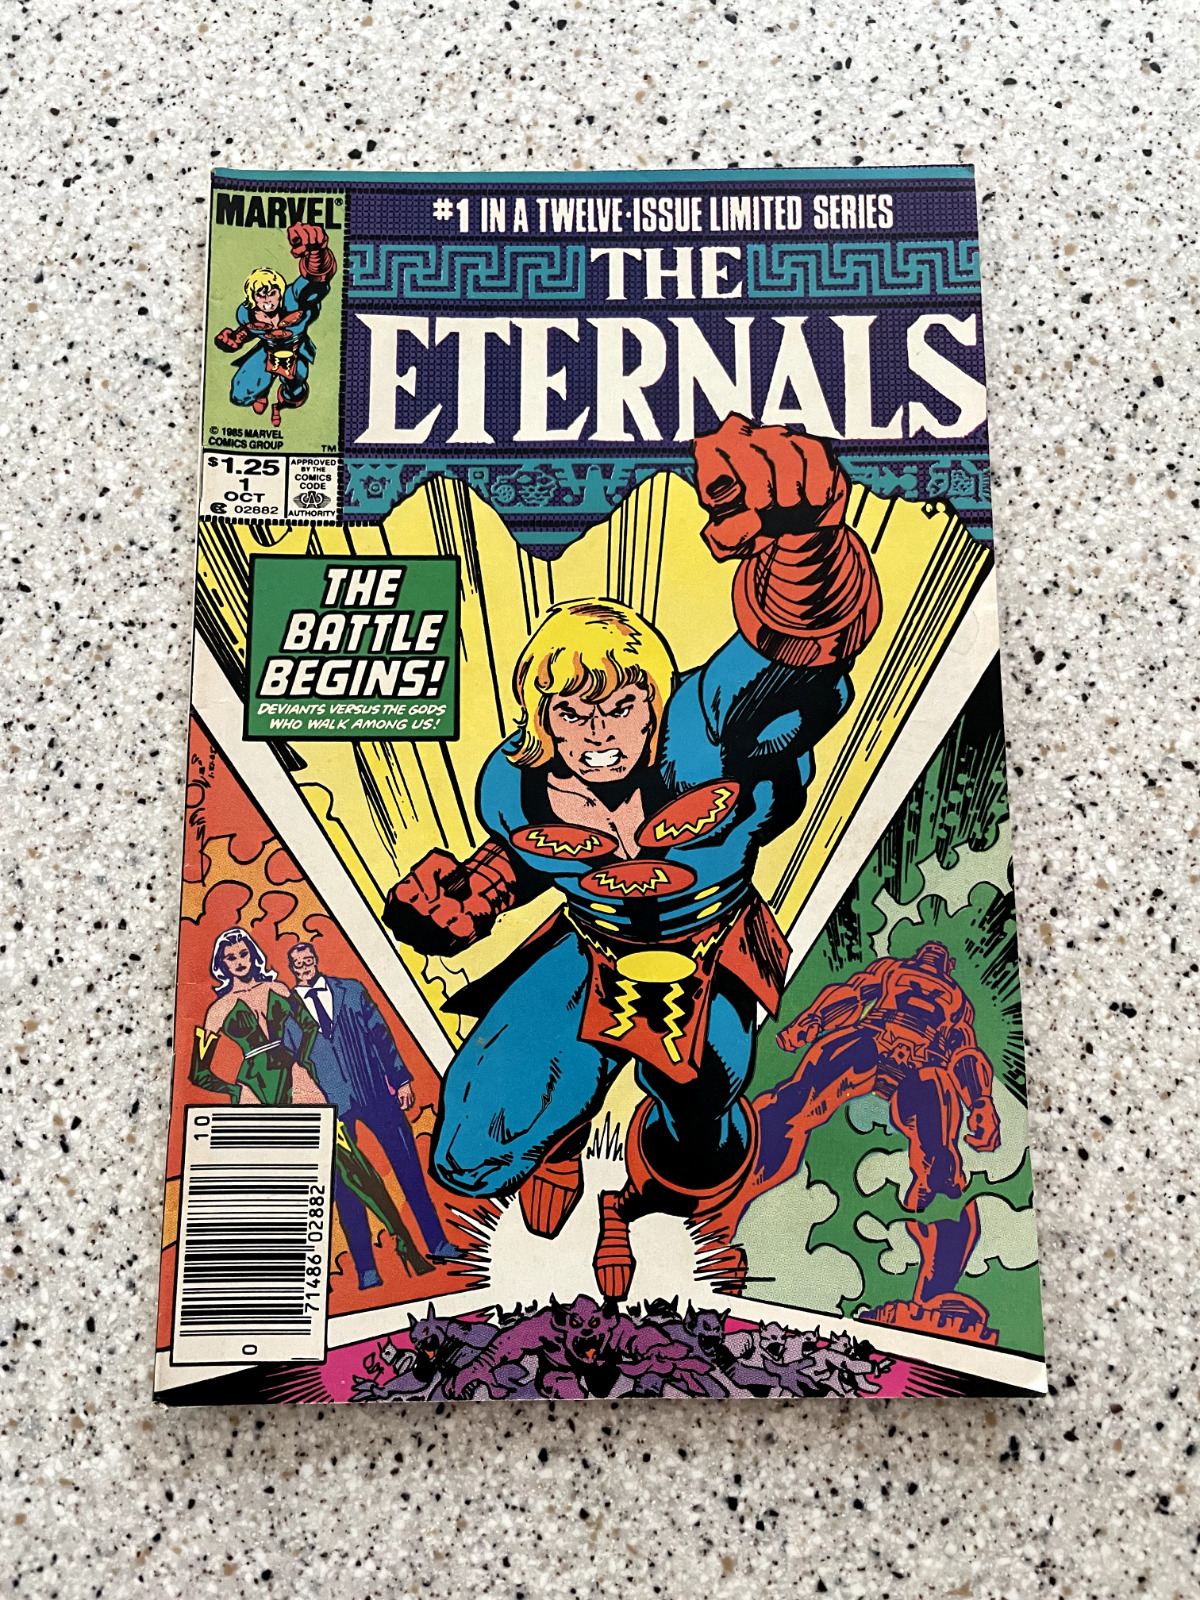 The Eternals #1 - 1st appearance of Phastos